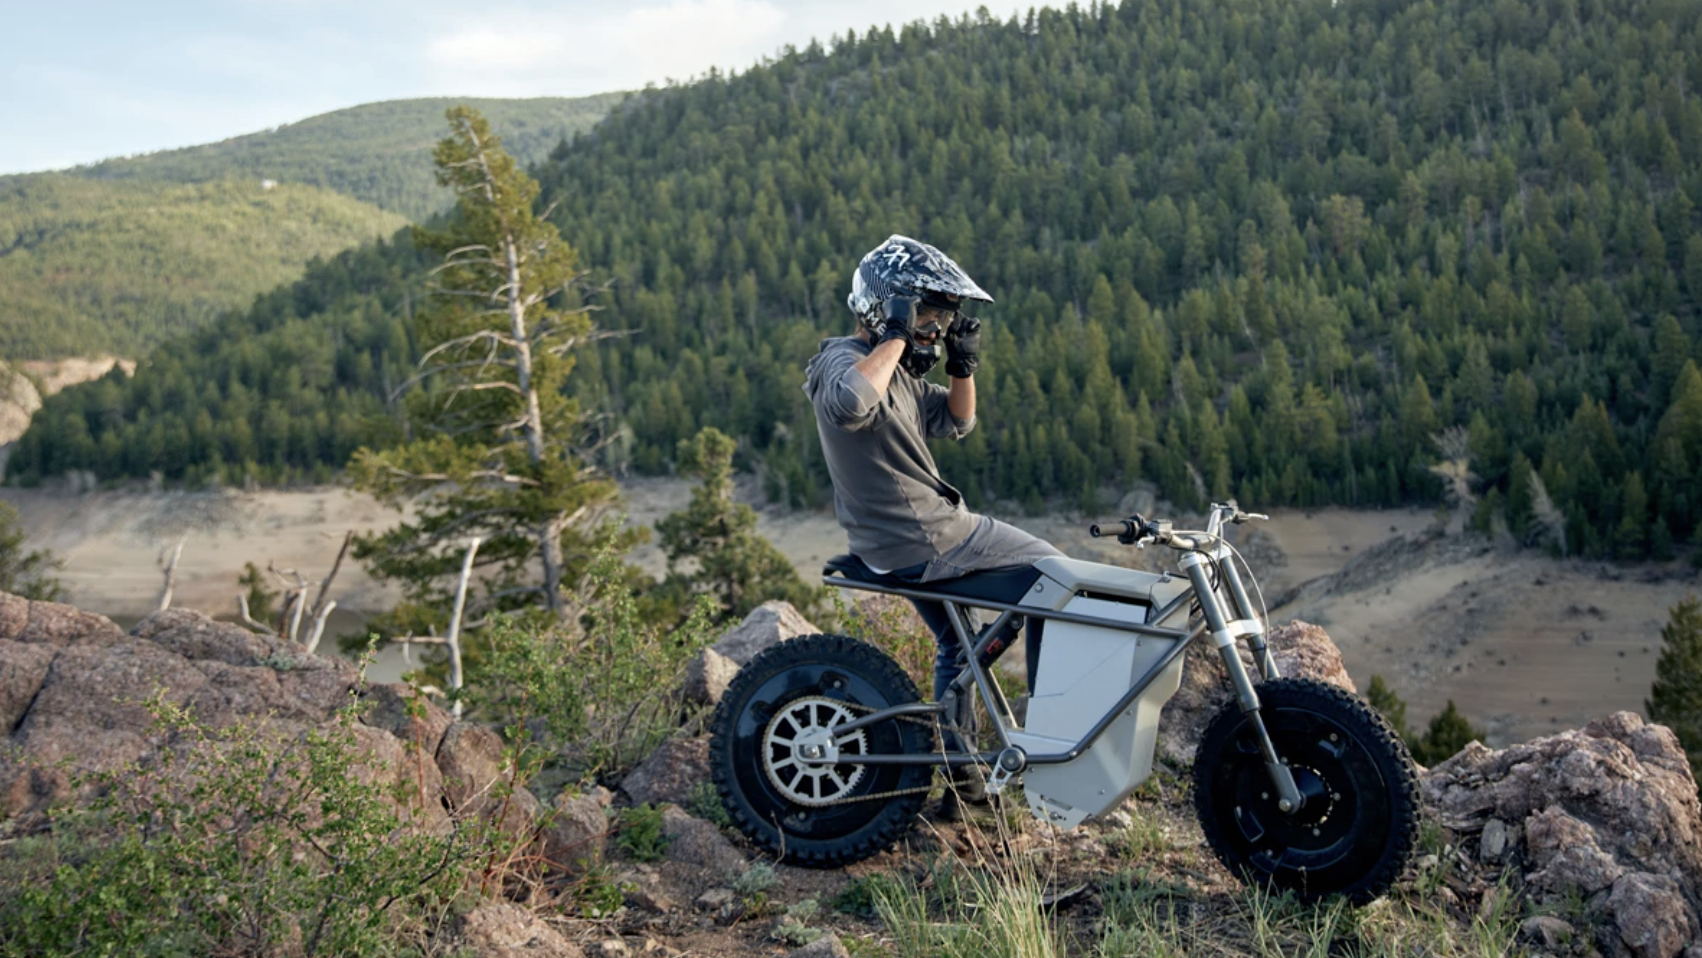 Land Energy Could Make A Capable Lightweight Electric Motorcycle For The Trail